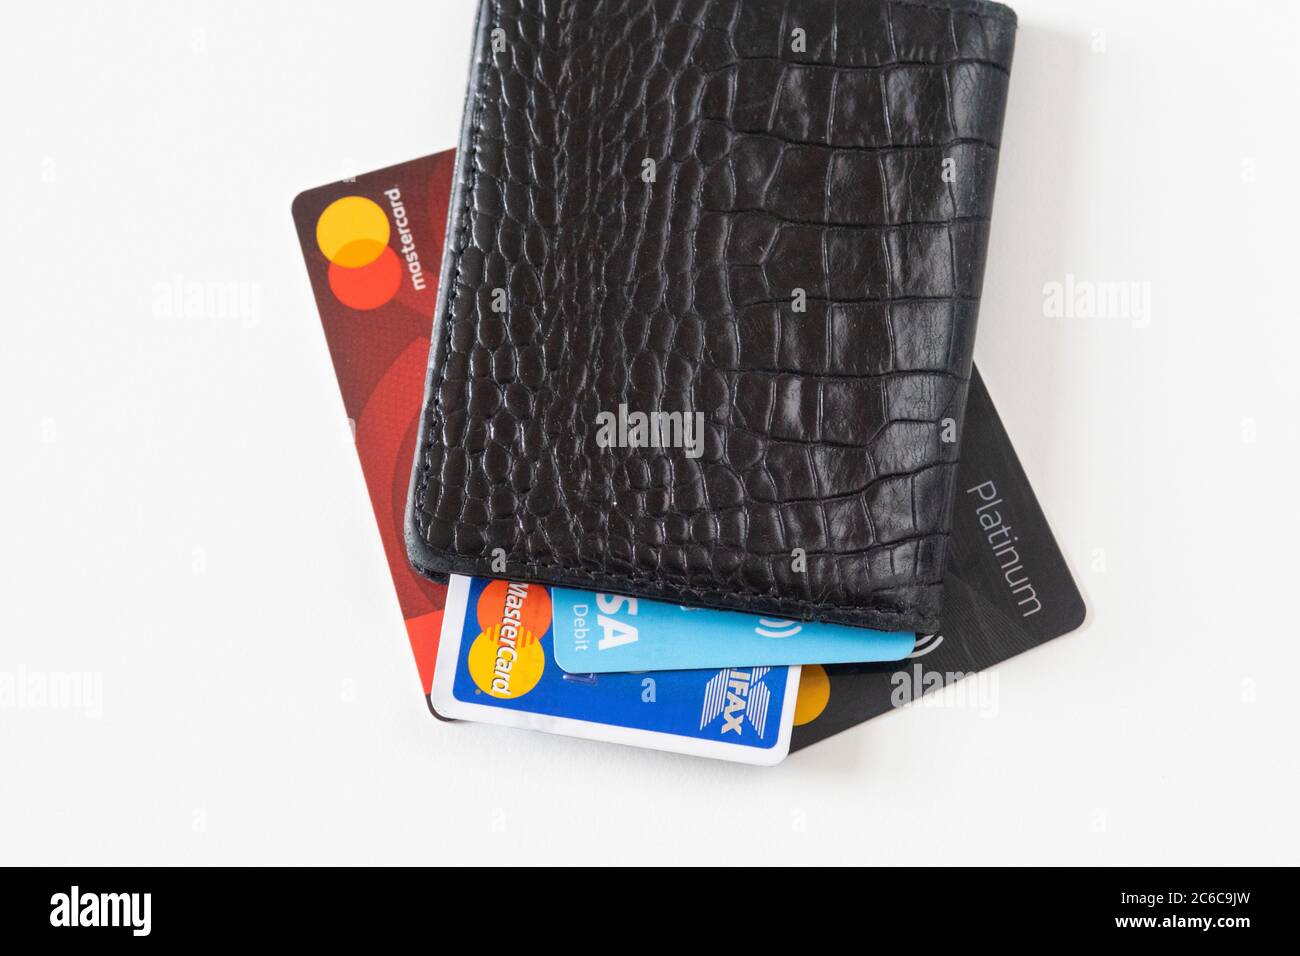 Closed wallet or purse with cards, debit, credit, bank - concept for cashless, no cash, no physical money, move towards cashless society, contactless, Stock Photo